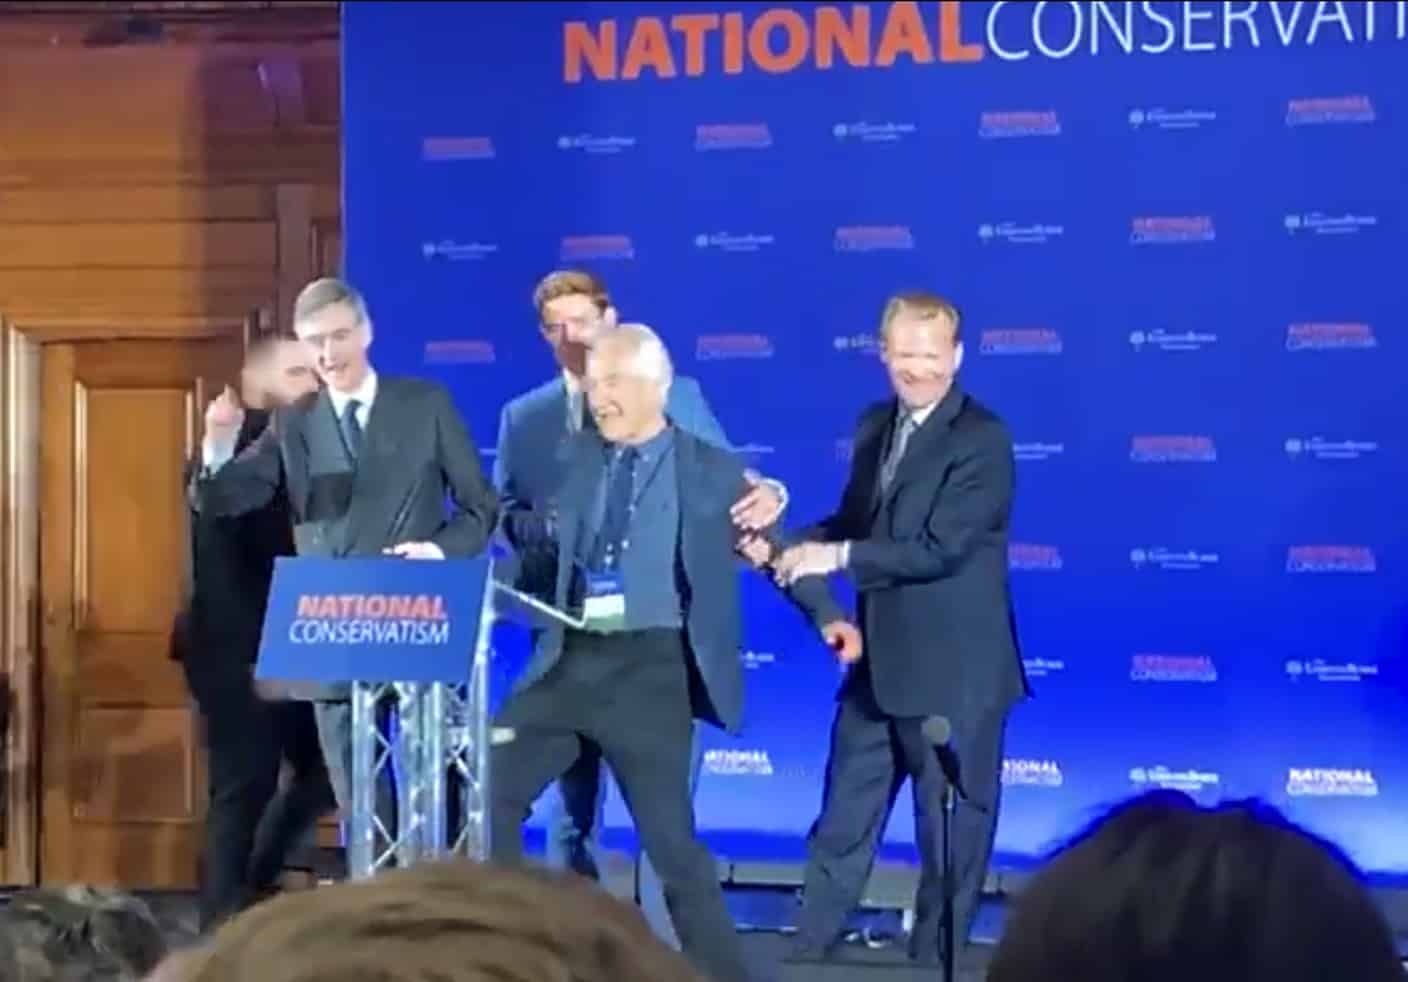 Protester storms stage during Rees-Mogg’s speech to warn of ‘fascism’